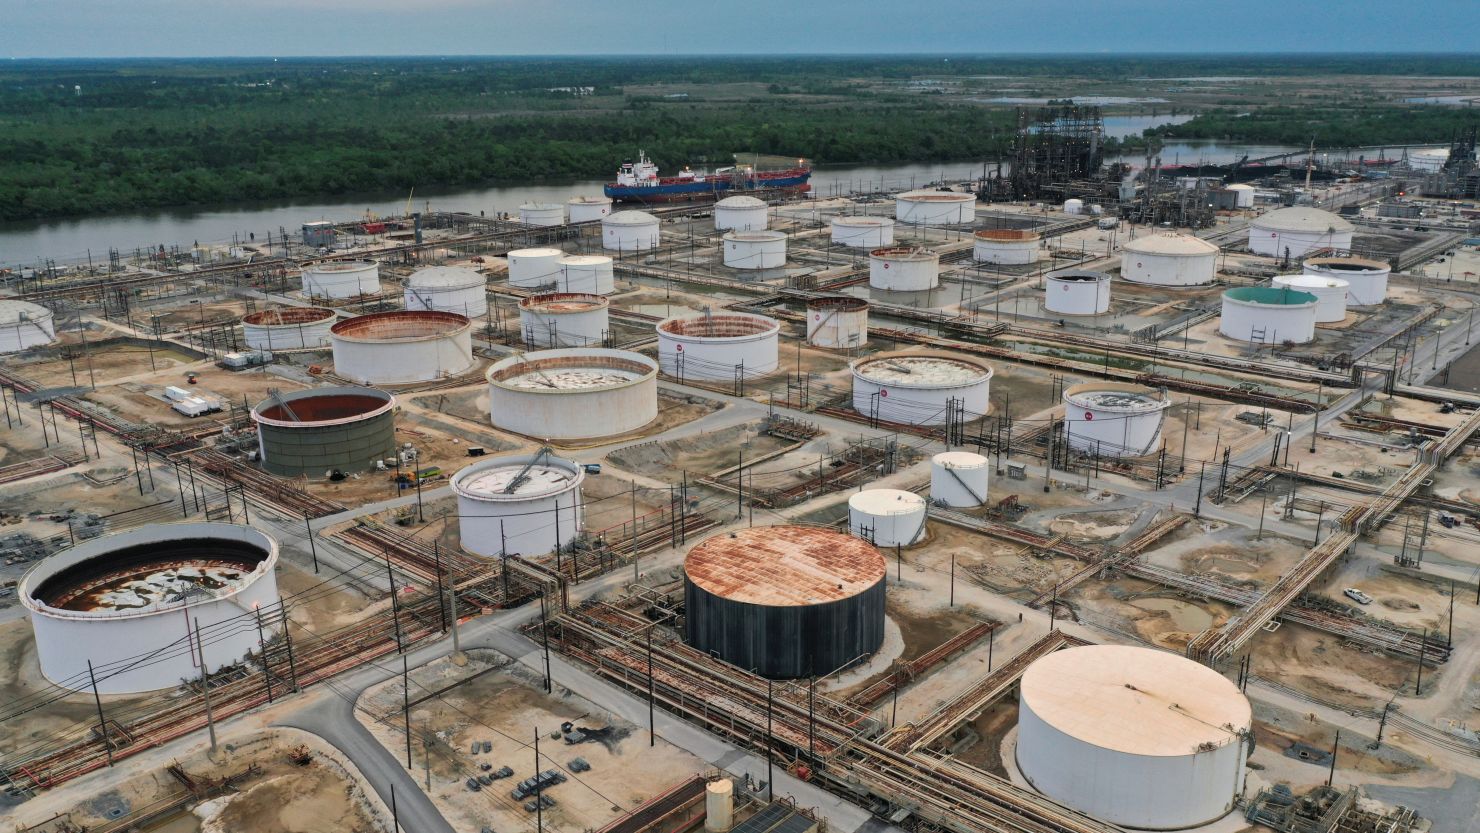 An aerial view of an oil tanker and storage tanks at Exxon Mobil’s Beaumont oil refinery, which produces and packages Mobil 1 synthetic motor oil, in Beaumont, Texas, March 18, 2023.